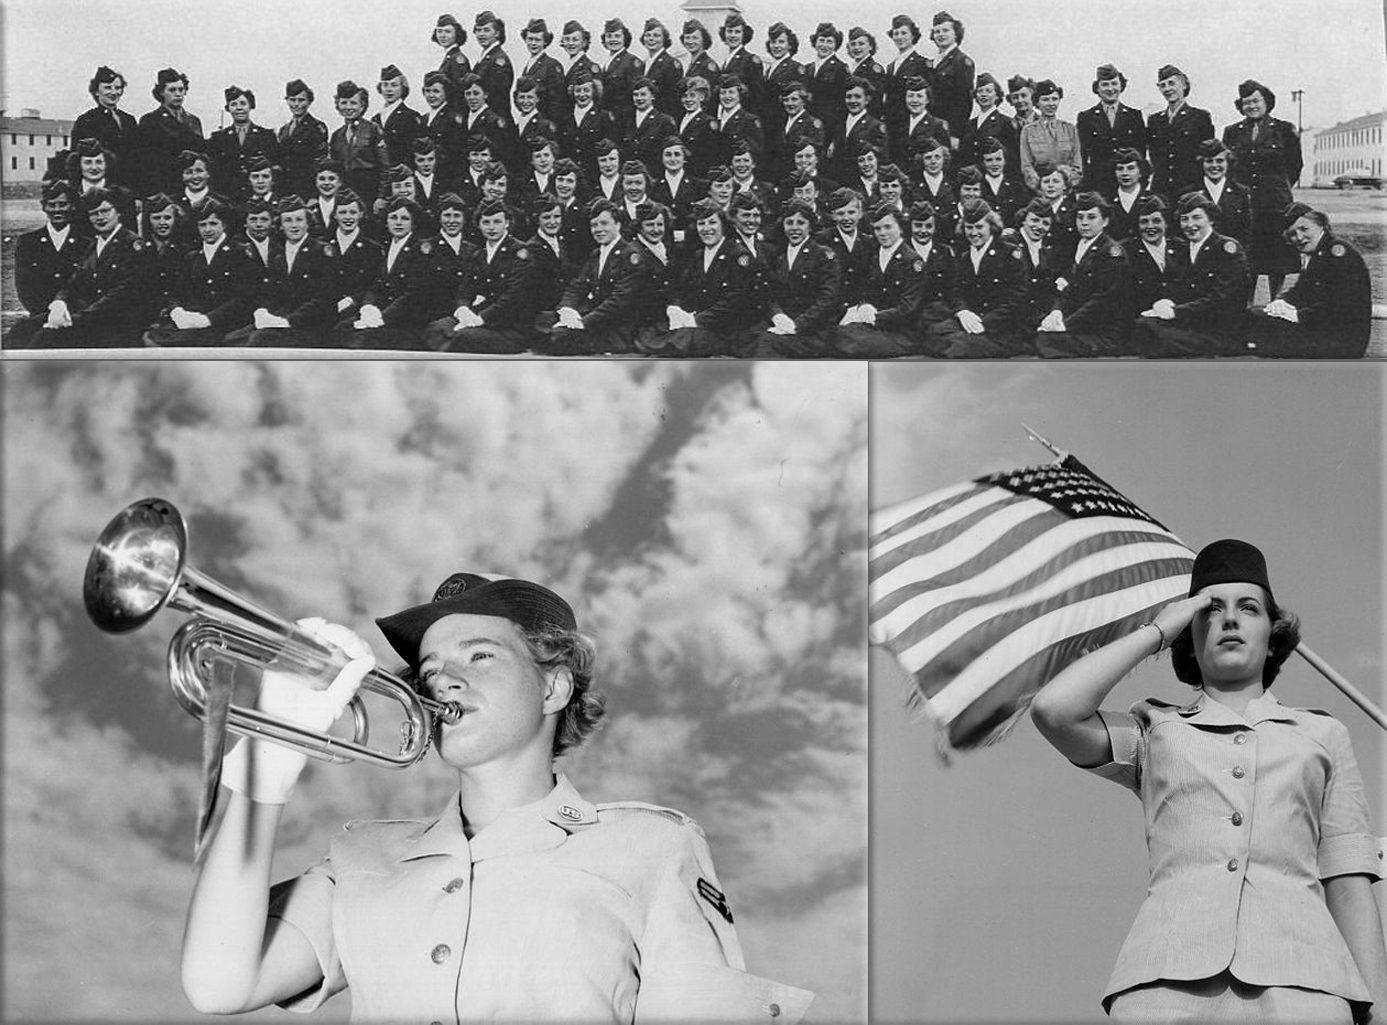 The United States Air Force accepts its first female recruits into a program called Women in the Air Force (WAF) on July 8th, 1948